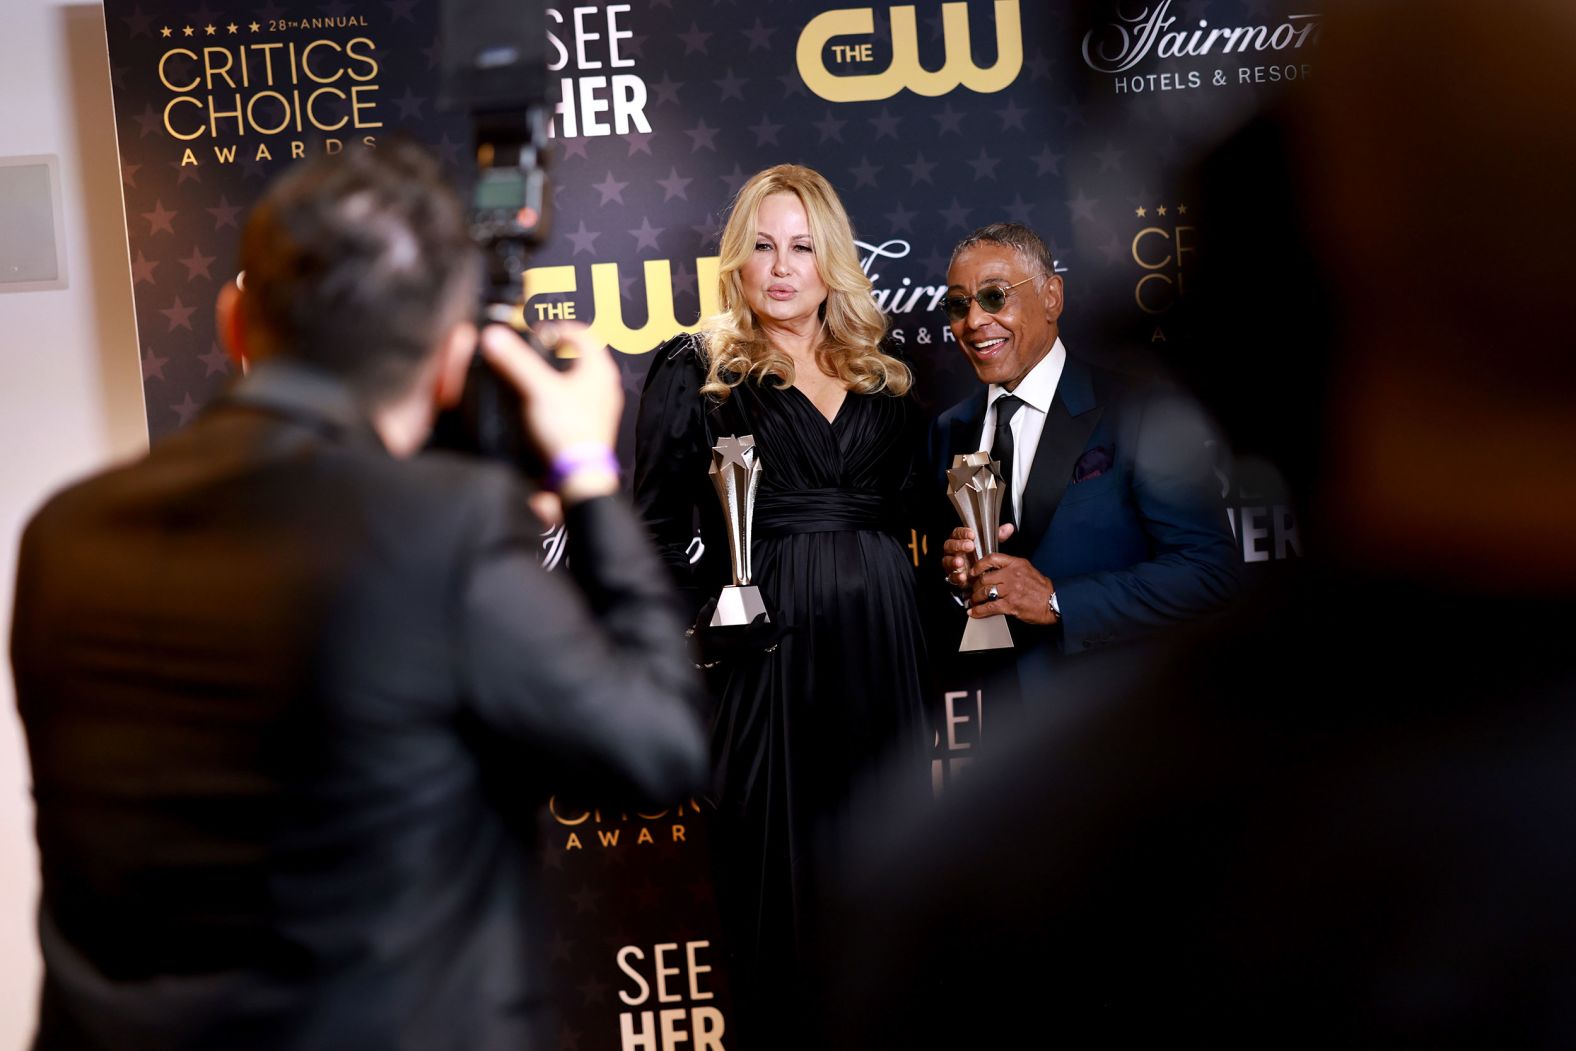 Actors Jennifer Coolidge and Giancarlo Esposito pose with their statuettes at the <a href="index.php?page=&url=https%3A%2F%2Fwww.cnn.com%2Fstyle%2Farticle%2Fred-carpet-critics-choice-2023%2Findex.html" target="_blank">Critics Choice Awards</a> in Los Angeles, California, on Sunday, January 15. Coolidge took home the award for best supporting actress in a drama series for her role in "The White Lotus" and Esposito won for best supporting actor in a drama series for his part in "Better Call Saul."